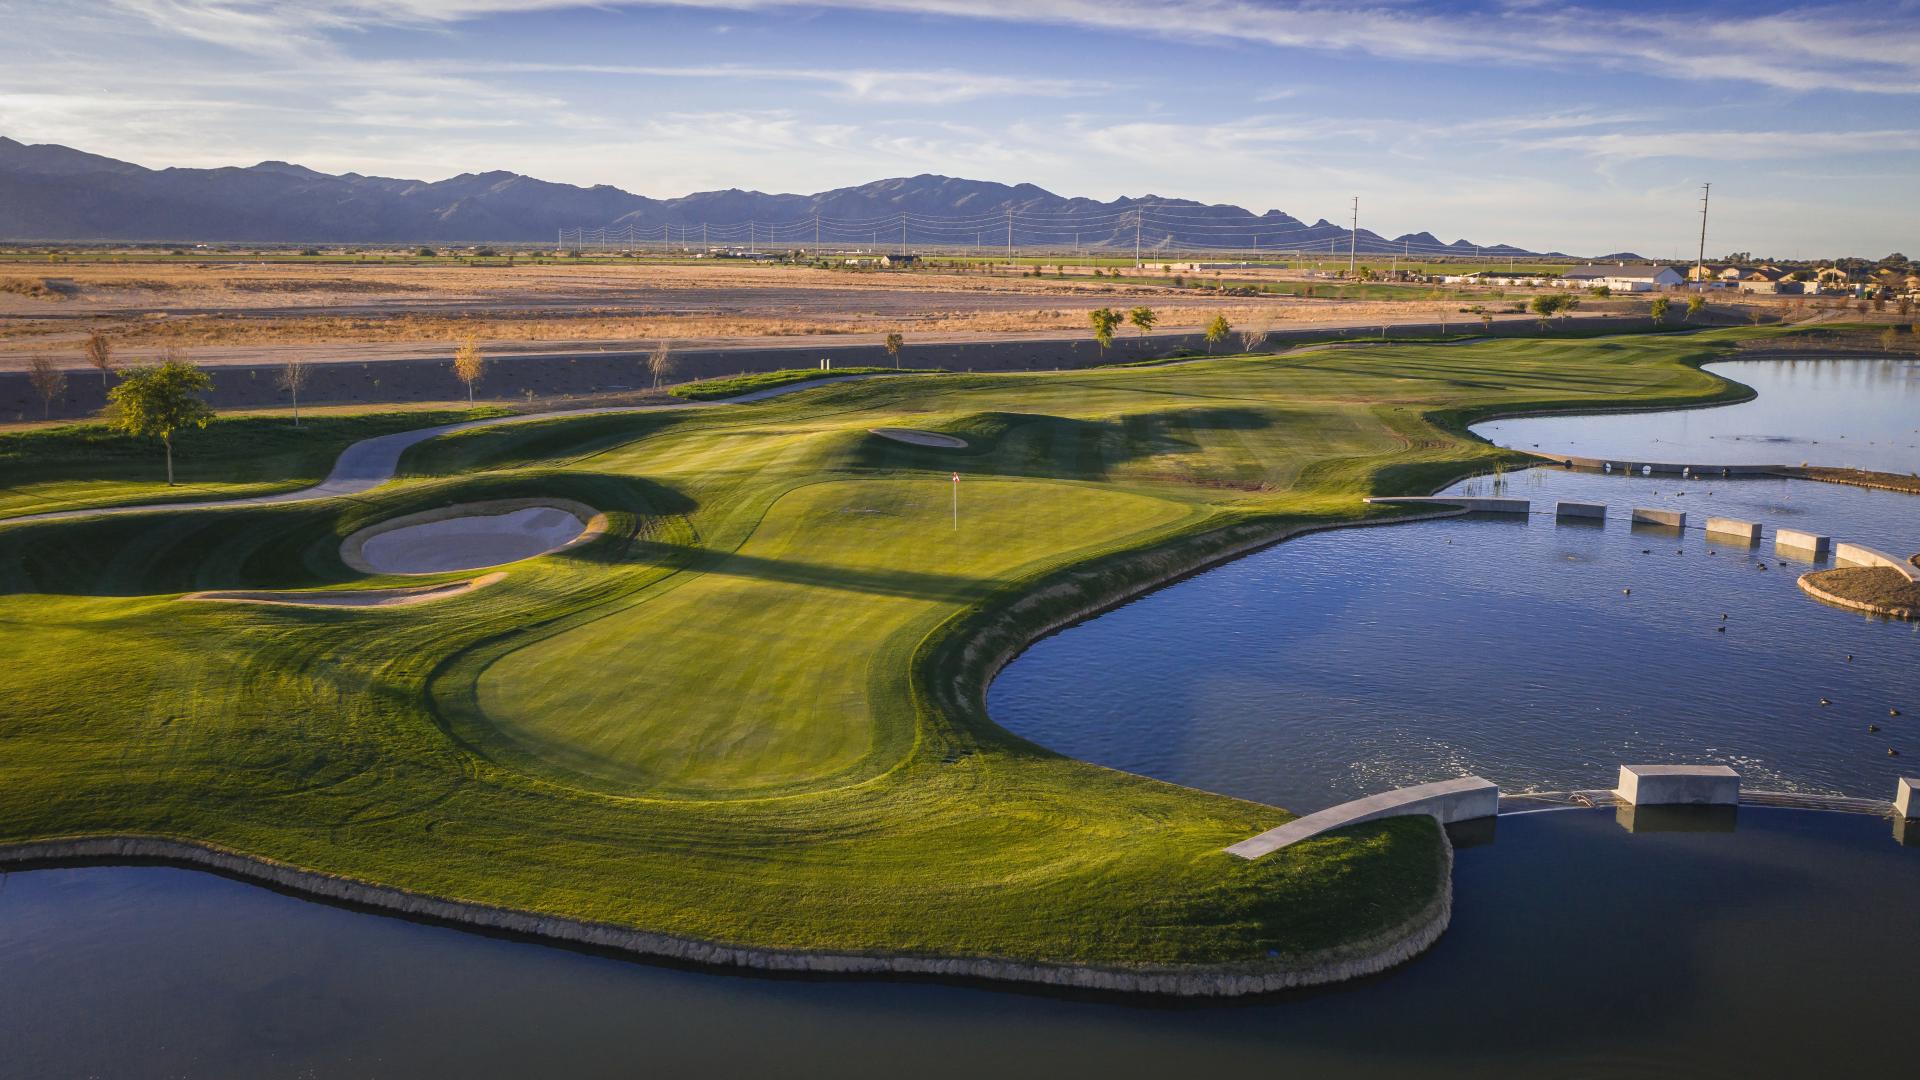 18-Hole Nicklaus Design golf course managed by Troon